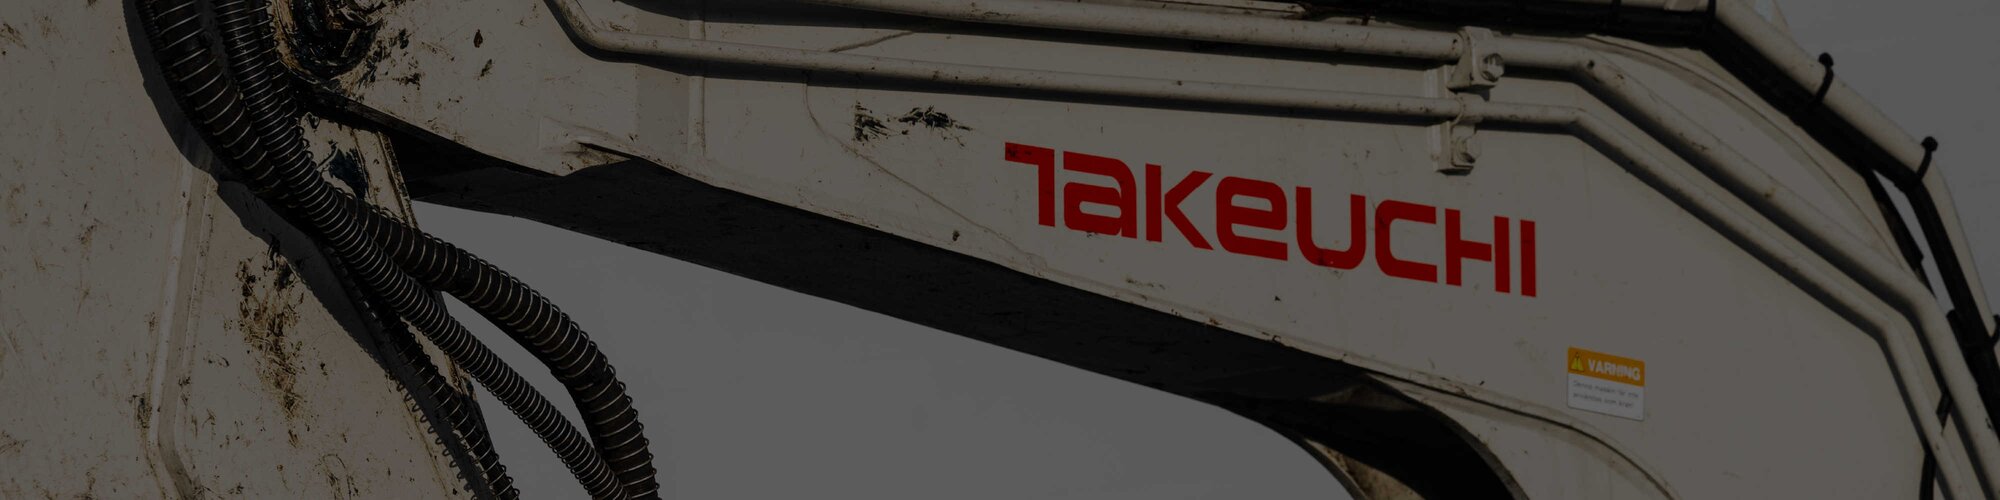 A close-up of the Takeuchi logo on the side of a white compact track loader